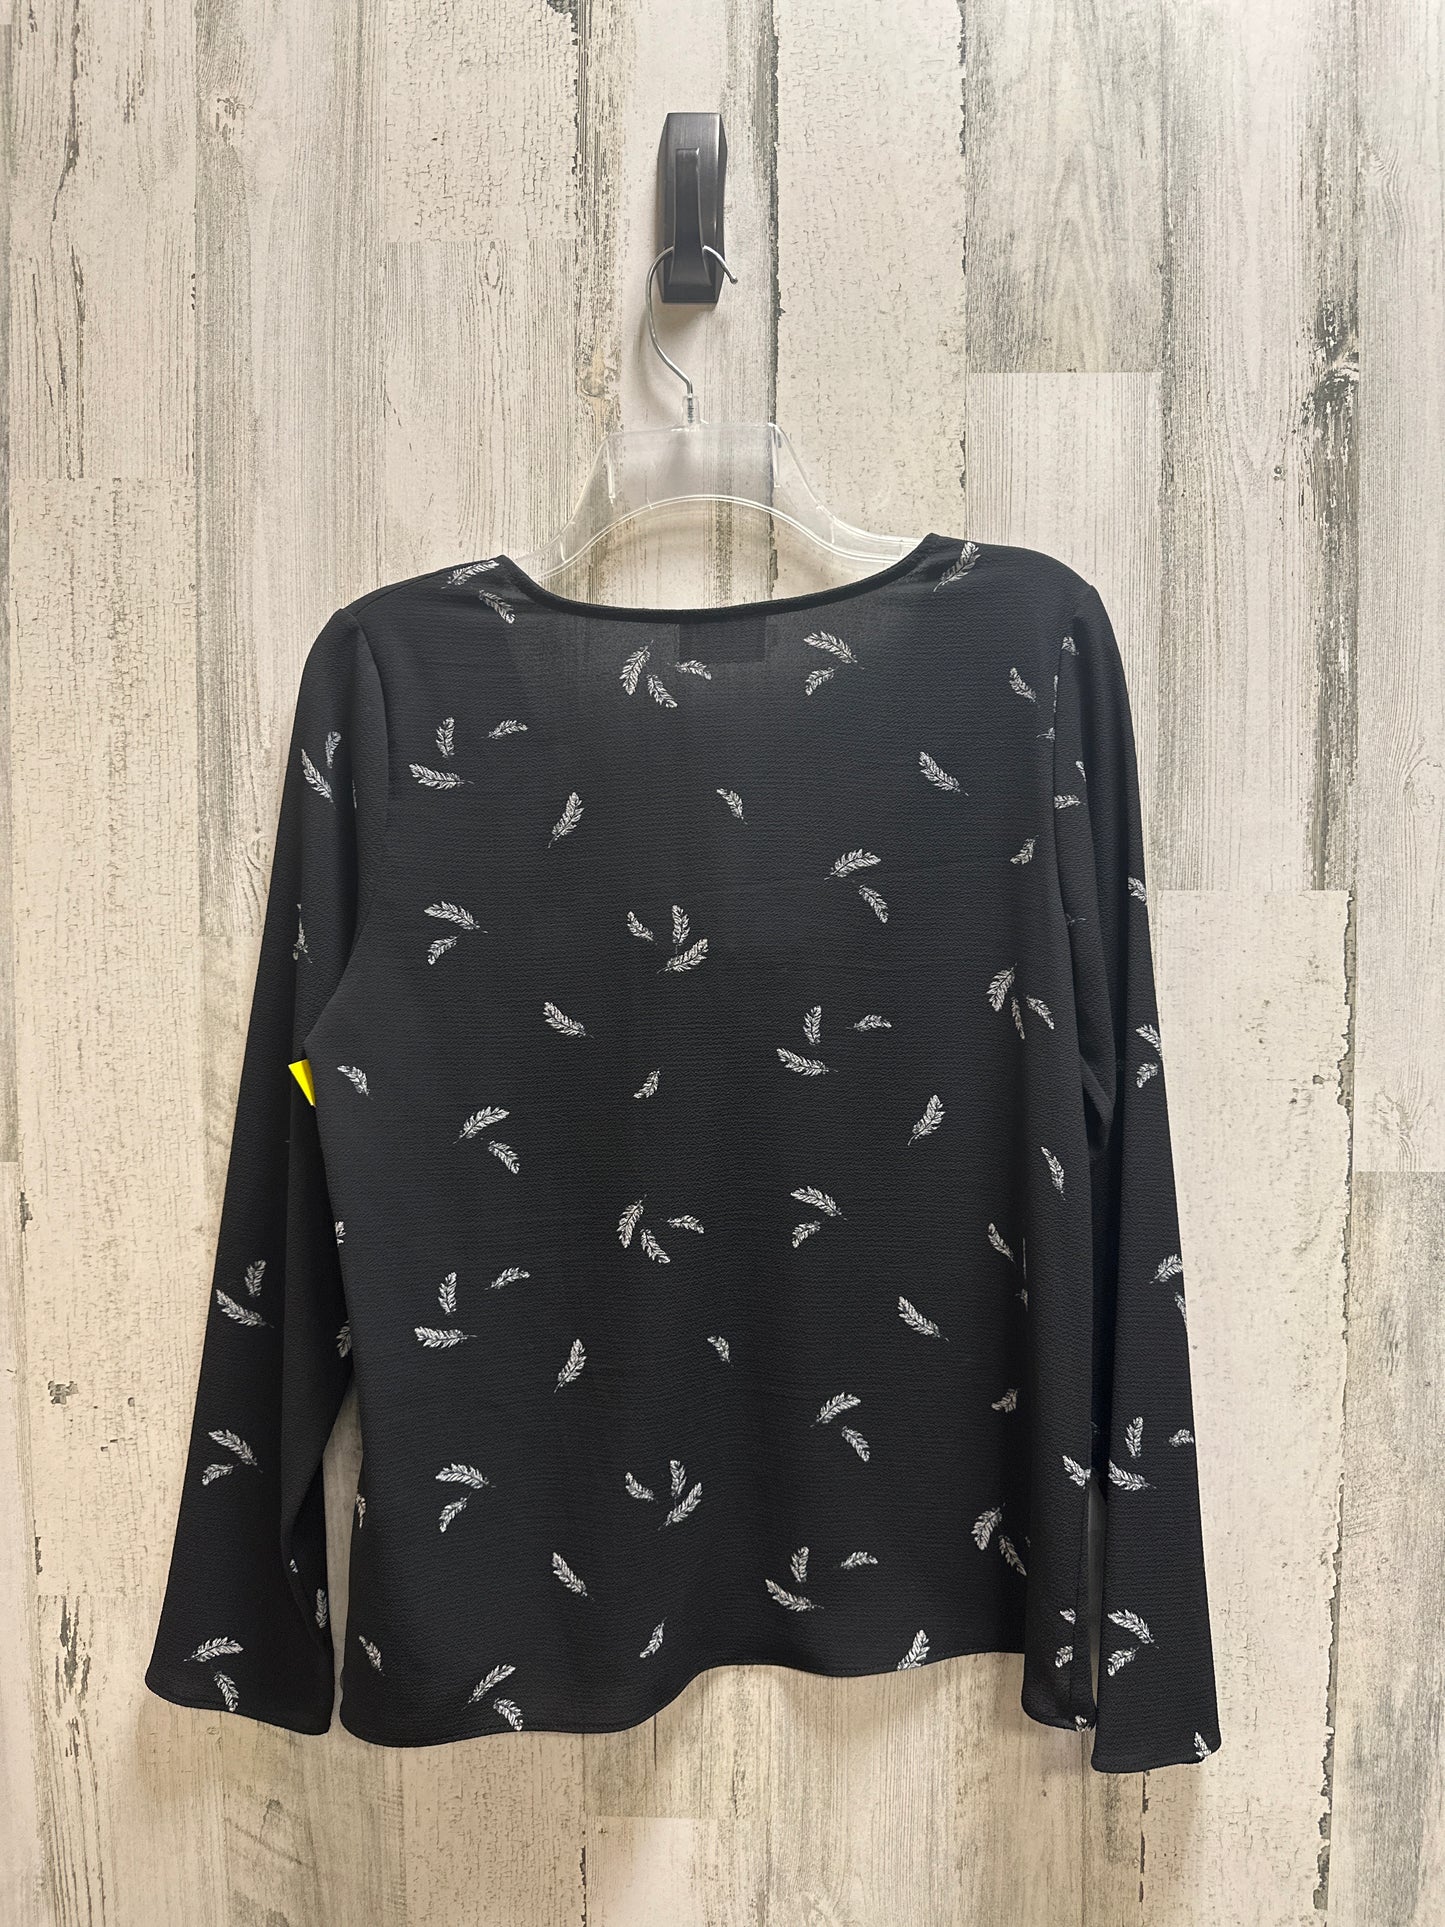 Top Long Sleeve By Everly  Size: S